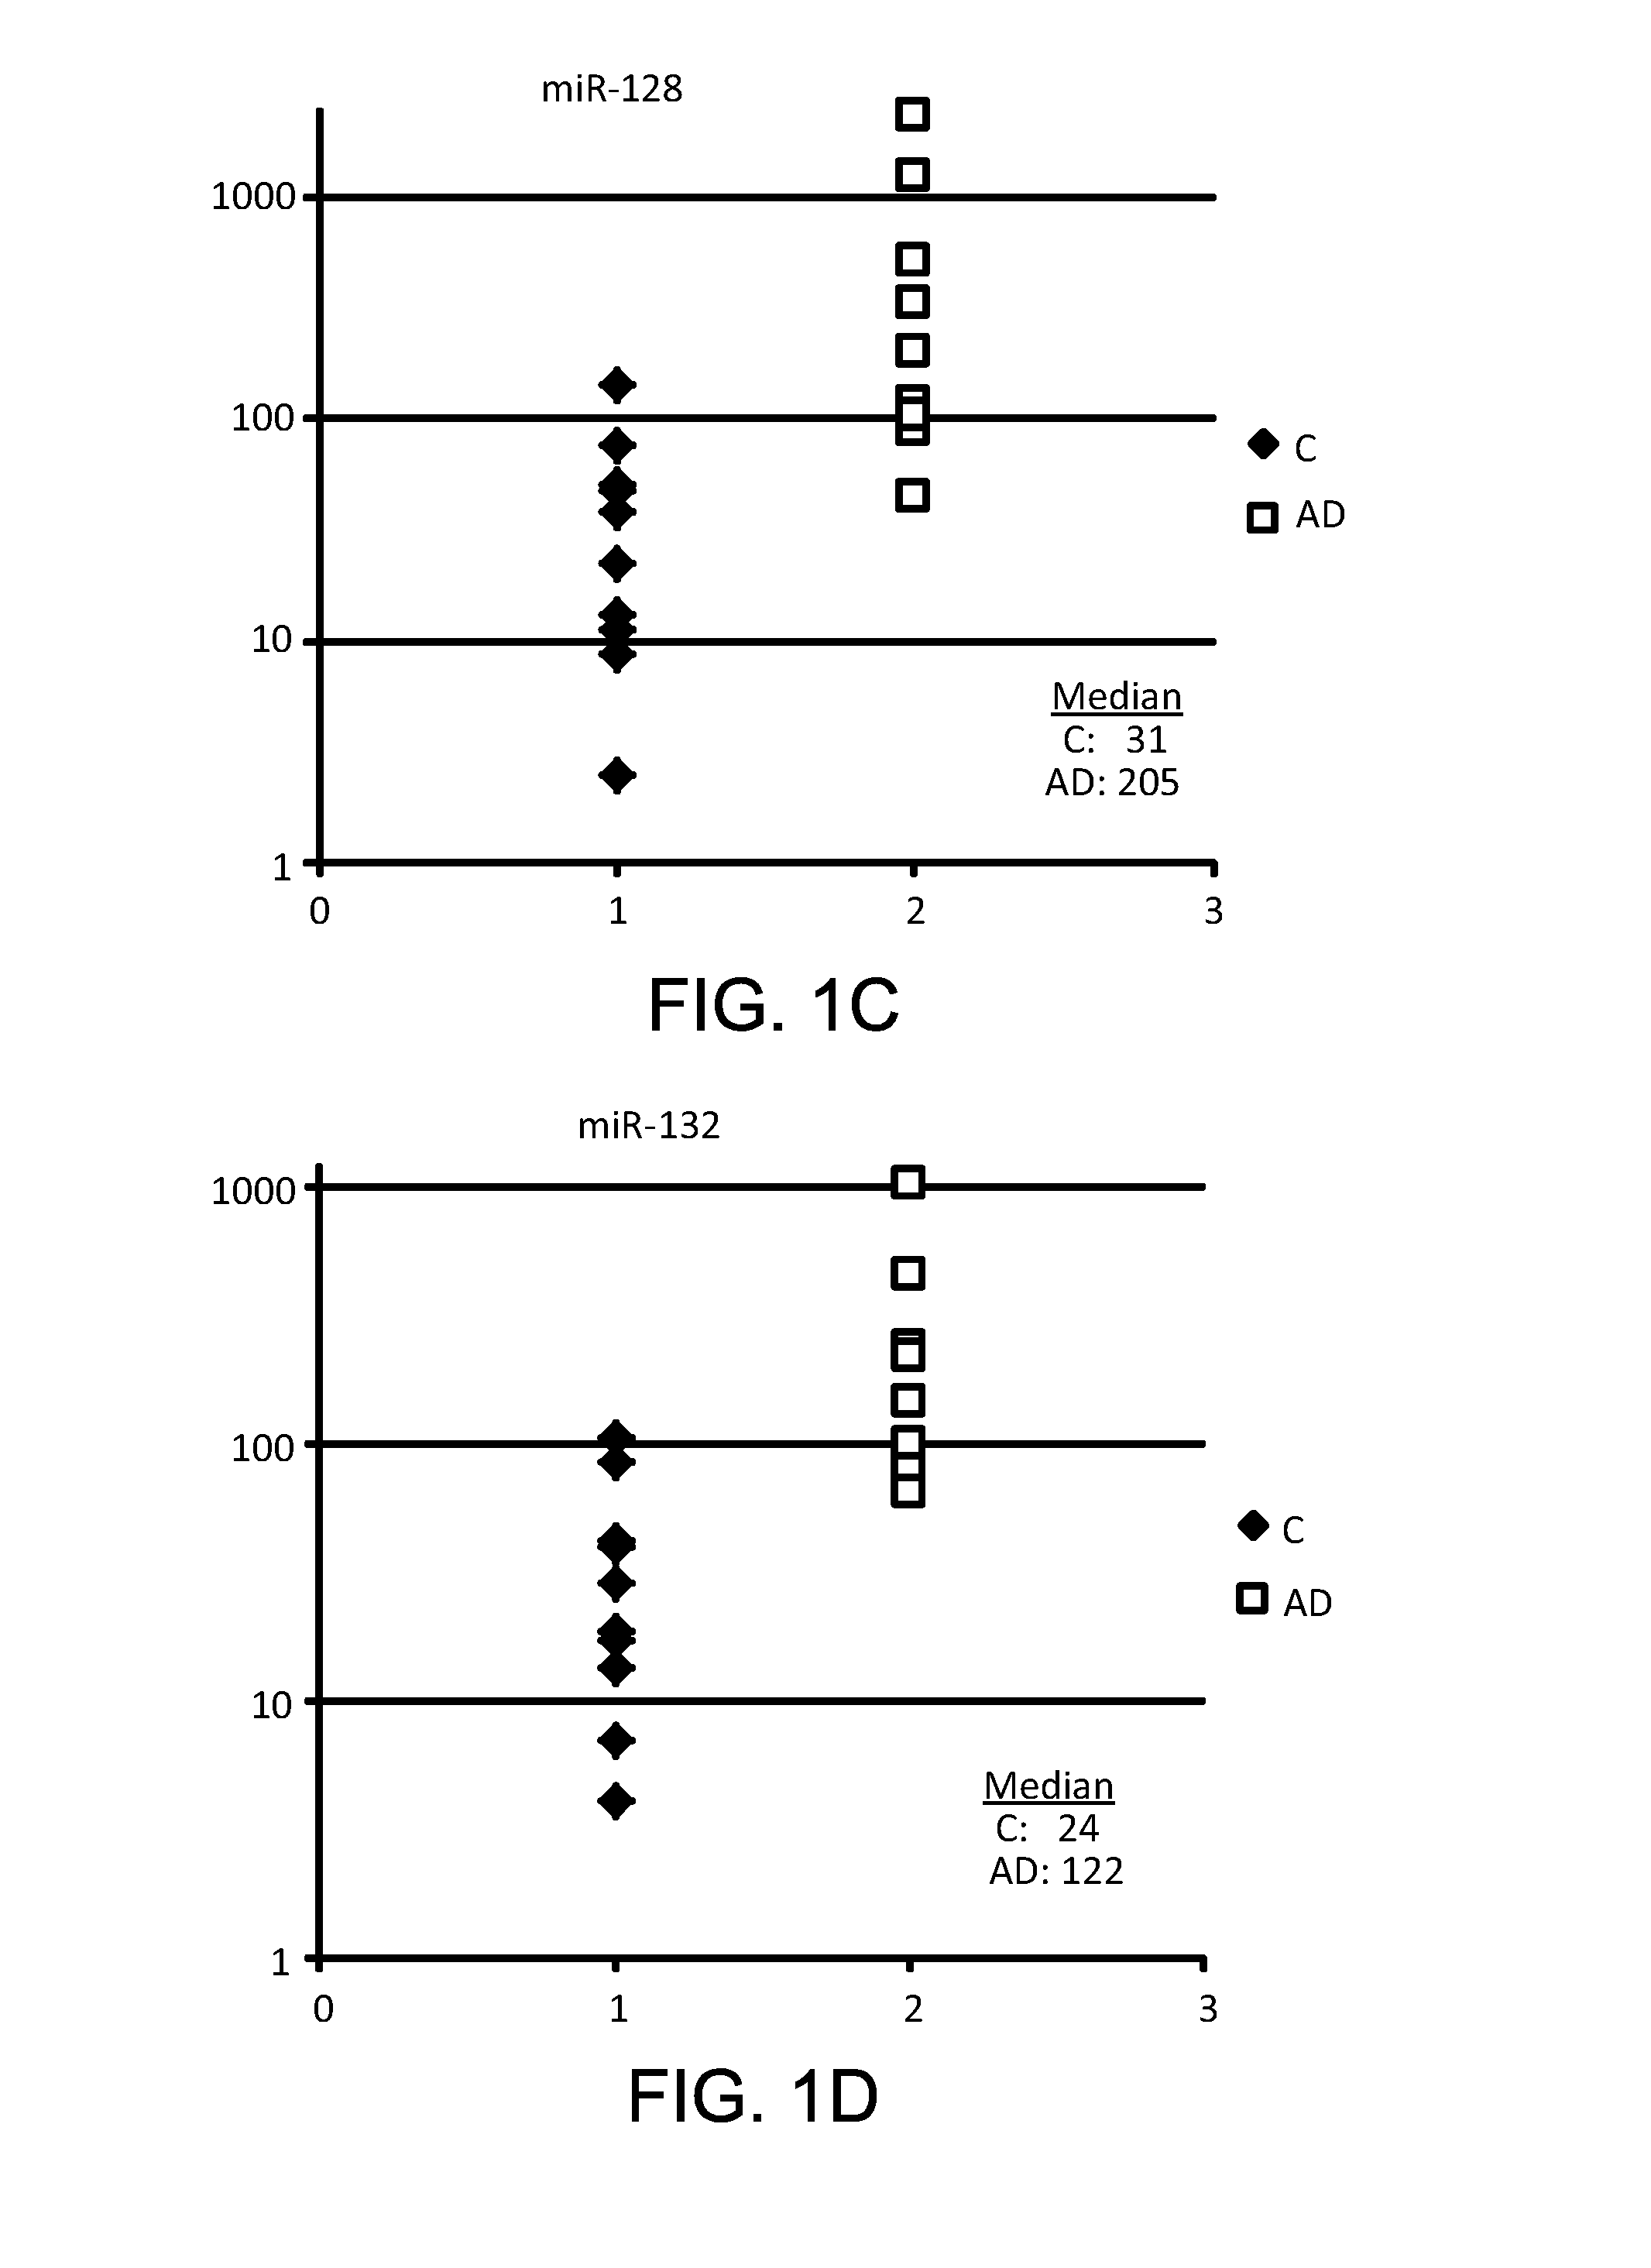 Methods of using small RNA from bodily fluids for diagnosis and monitoring of neurodegenerative diseases